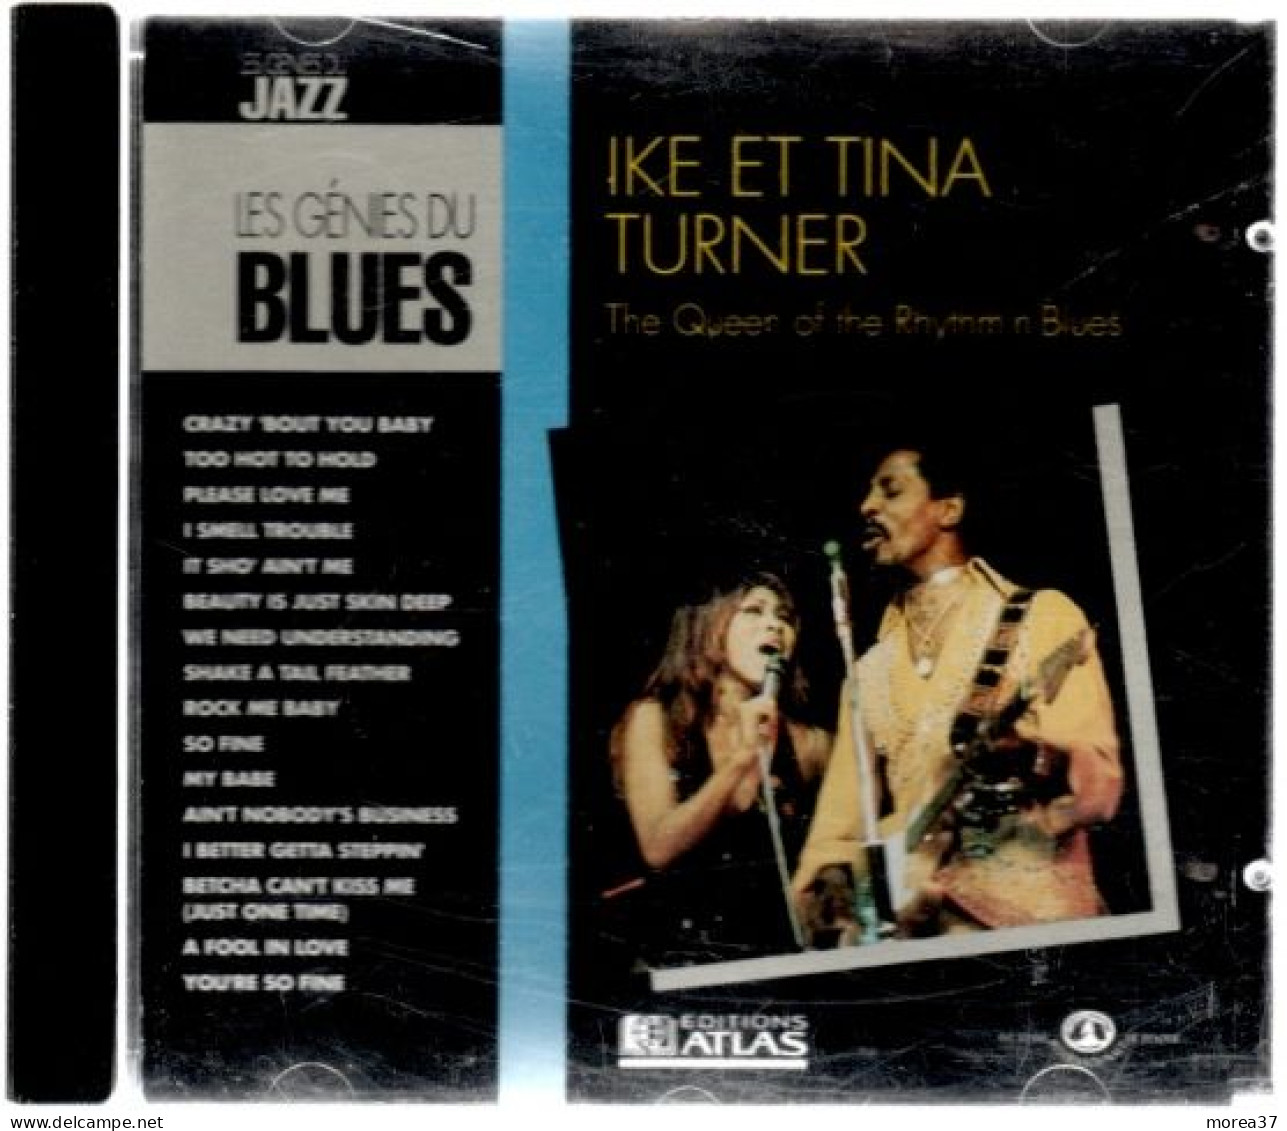 IKE ET TINA TURNER   The Queen Of The Rhythm' N' Blues     (CD 03 X2) - Other - English Music